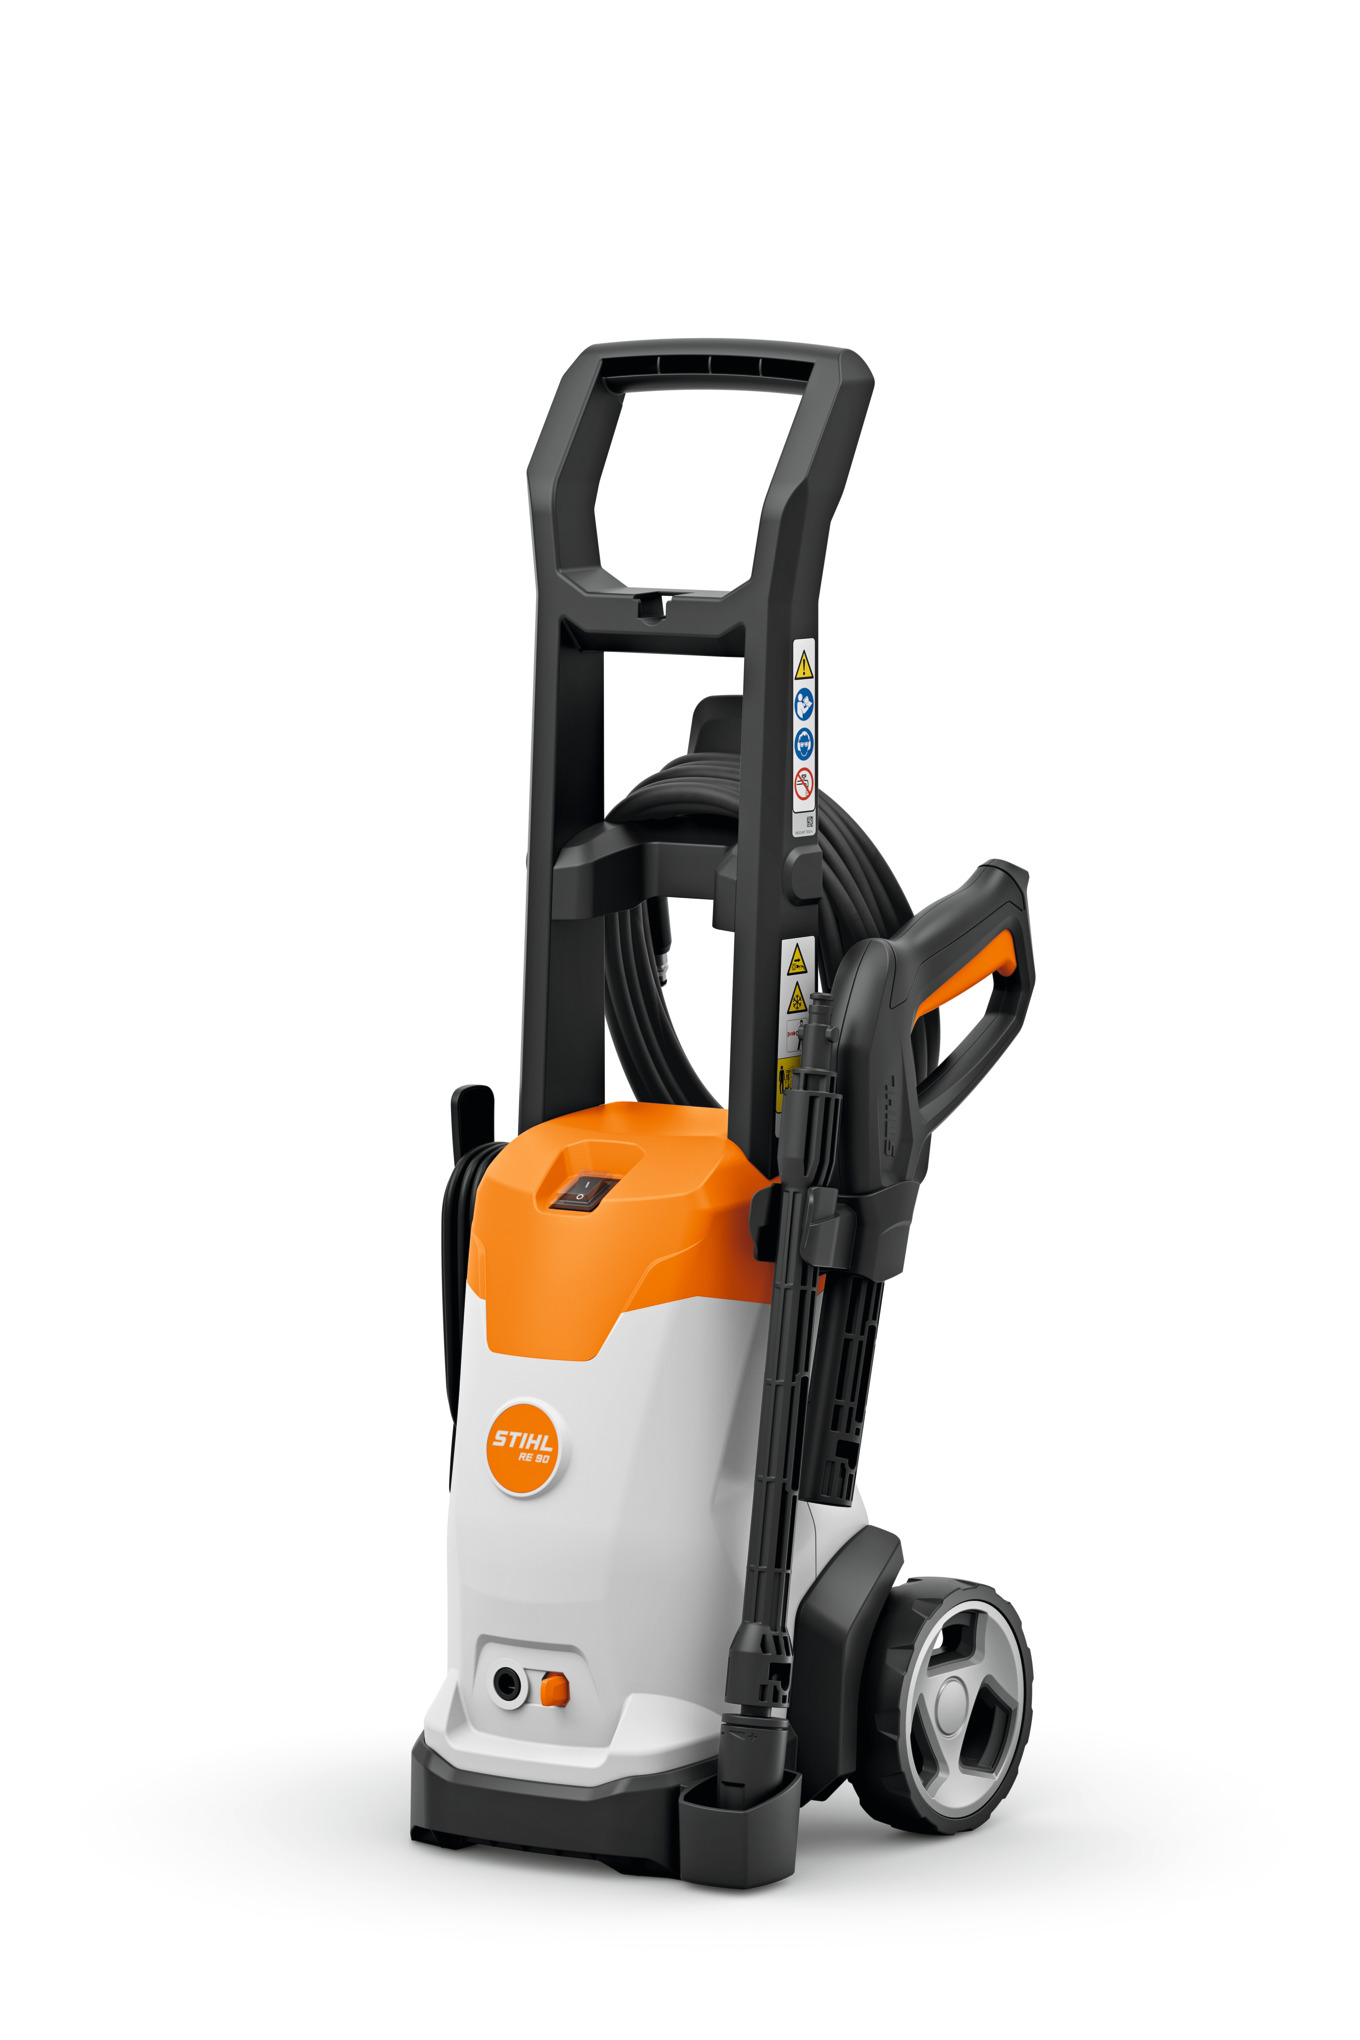 RE 90 Electric Pressure Washer